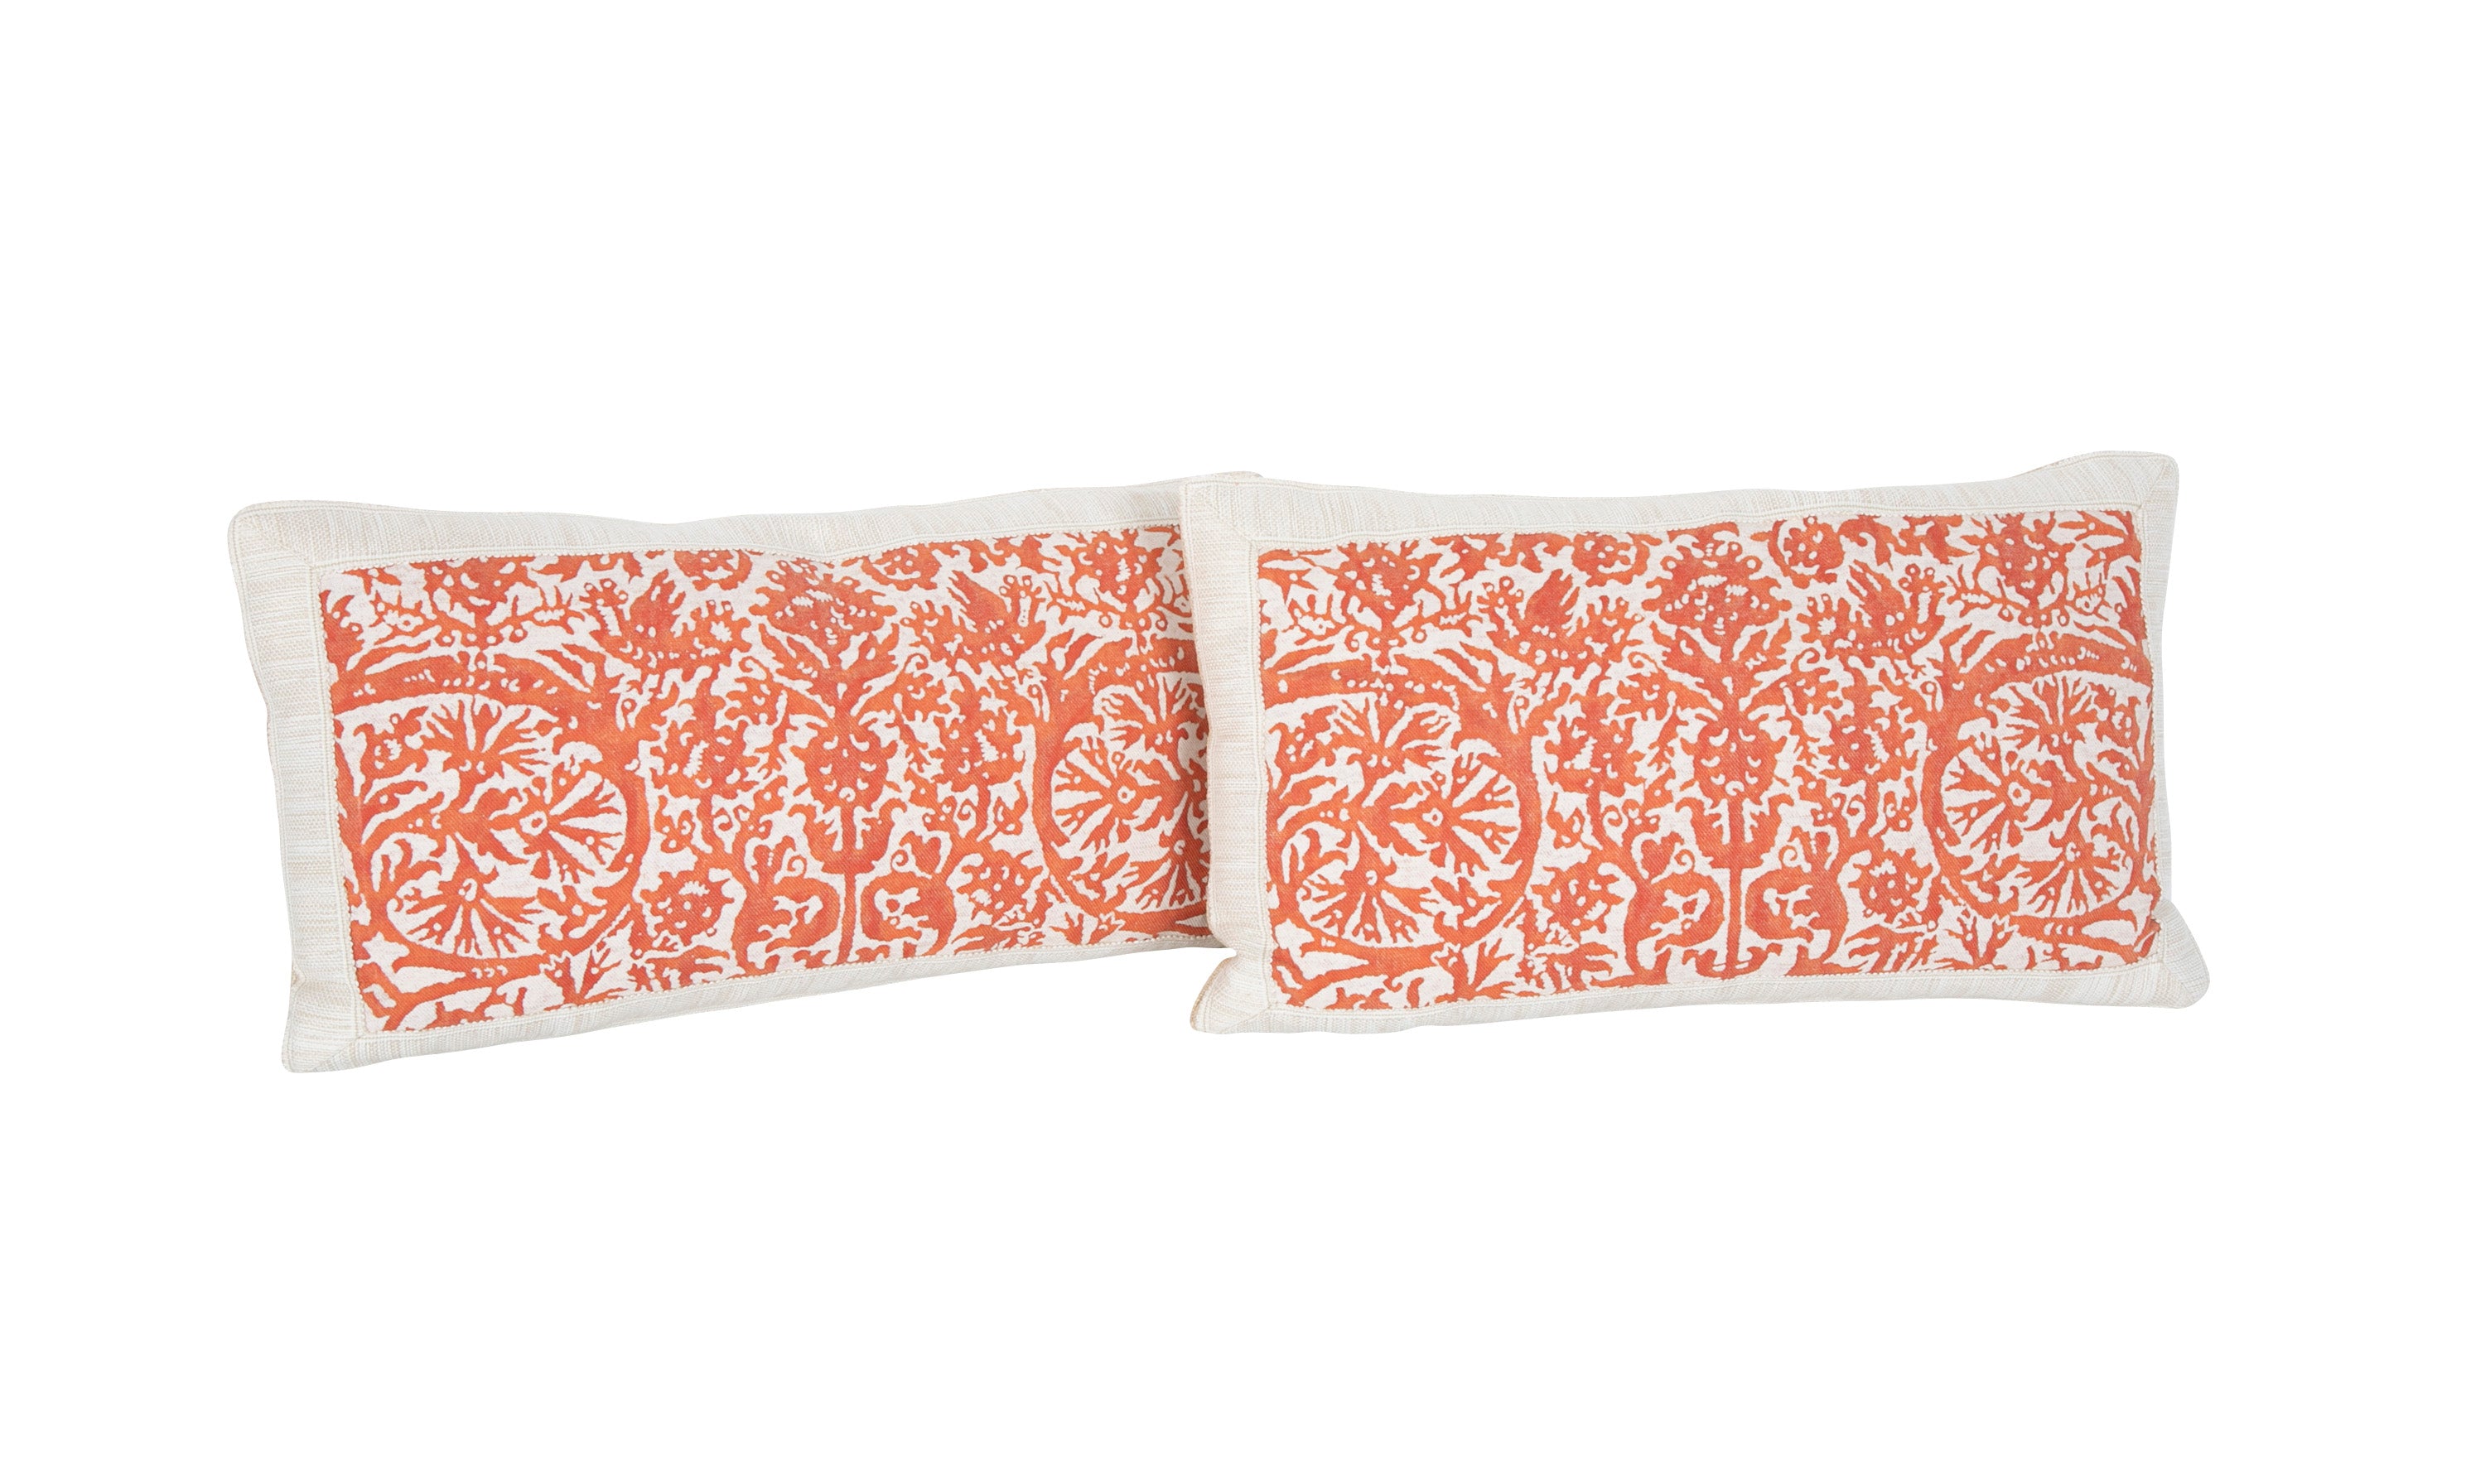 A Pair of Fortuny Linen Pillows with Raw Silk Backing  -  Also Priced Individually